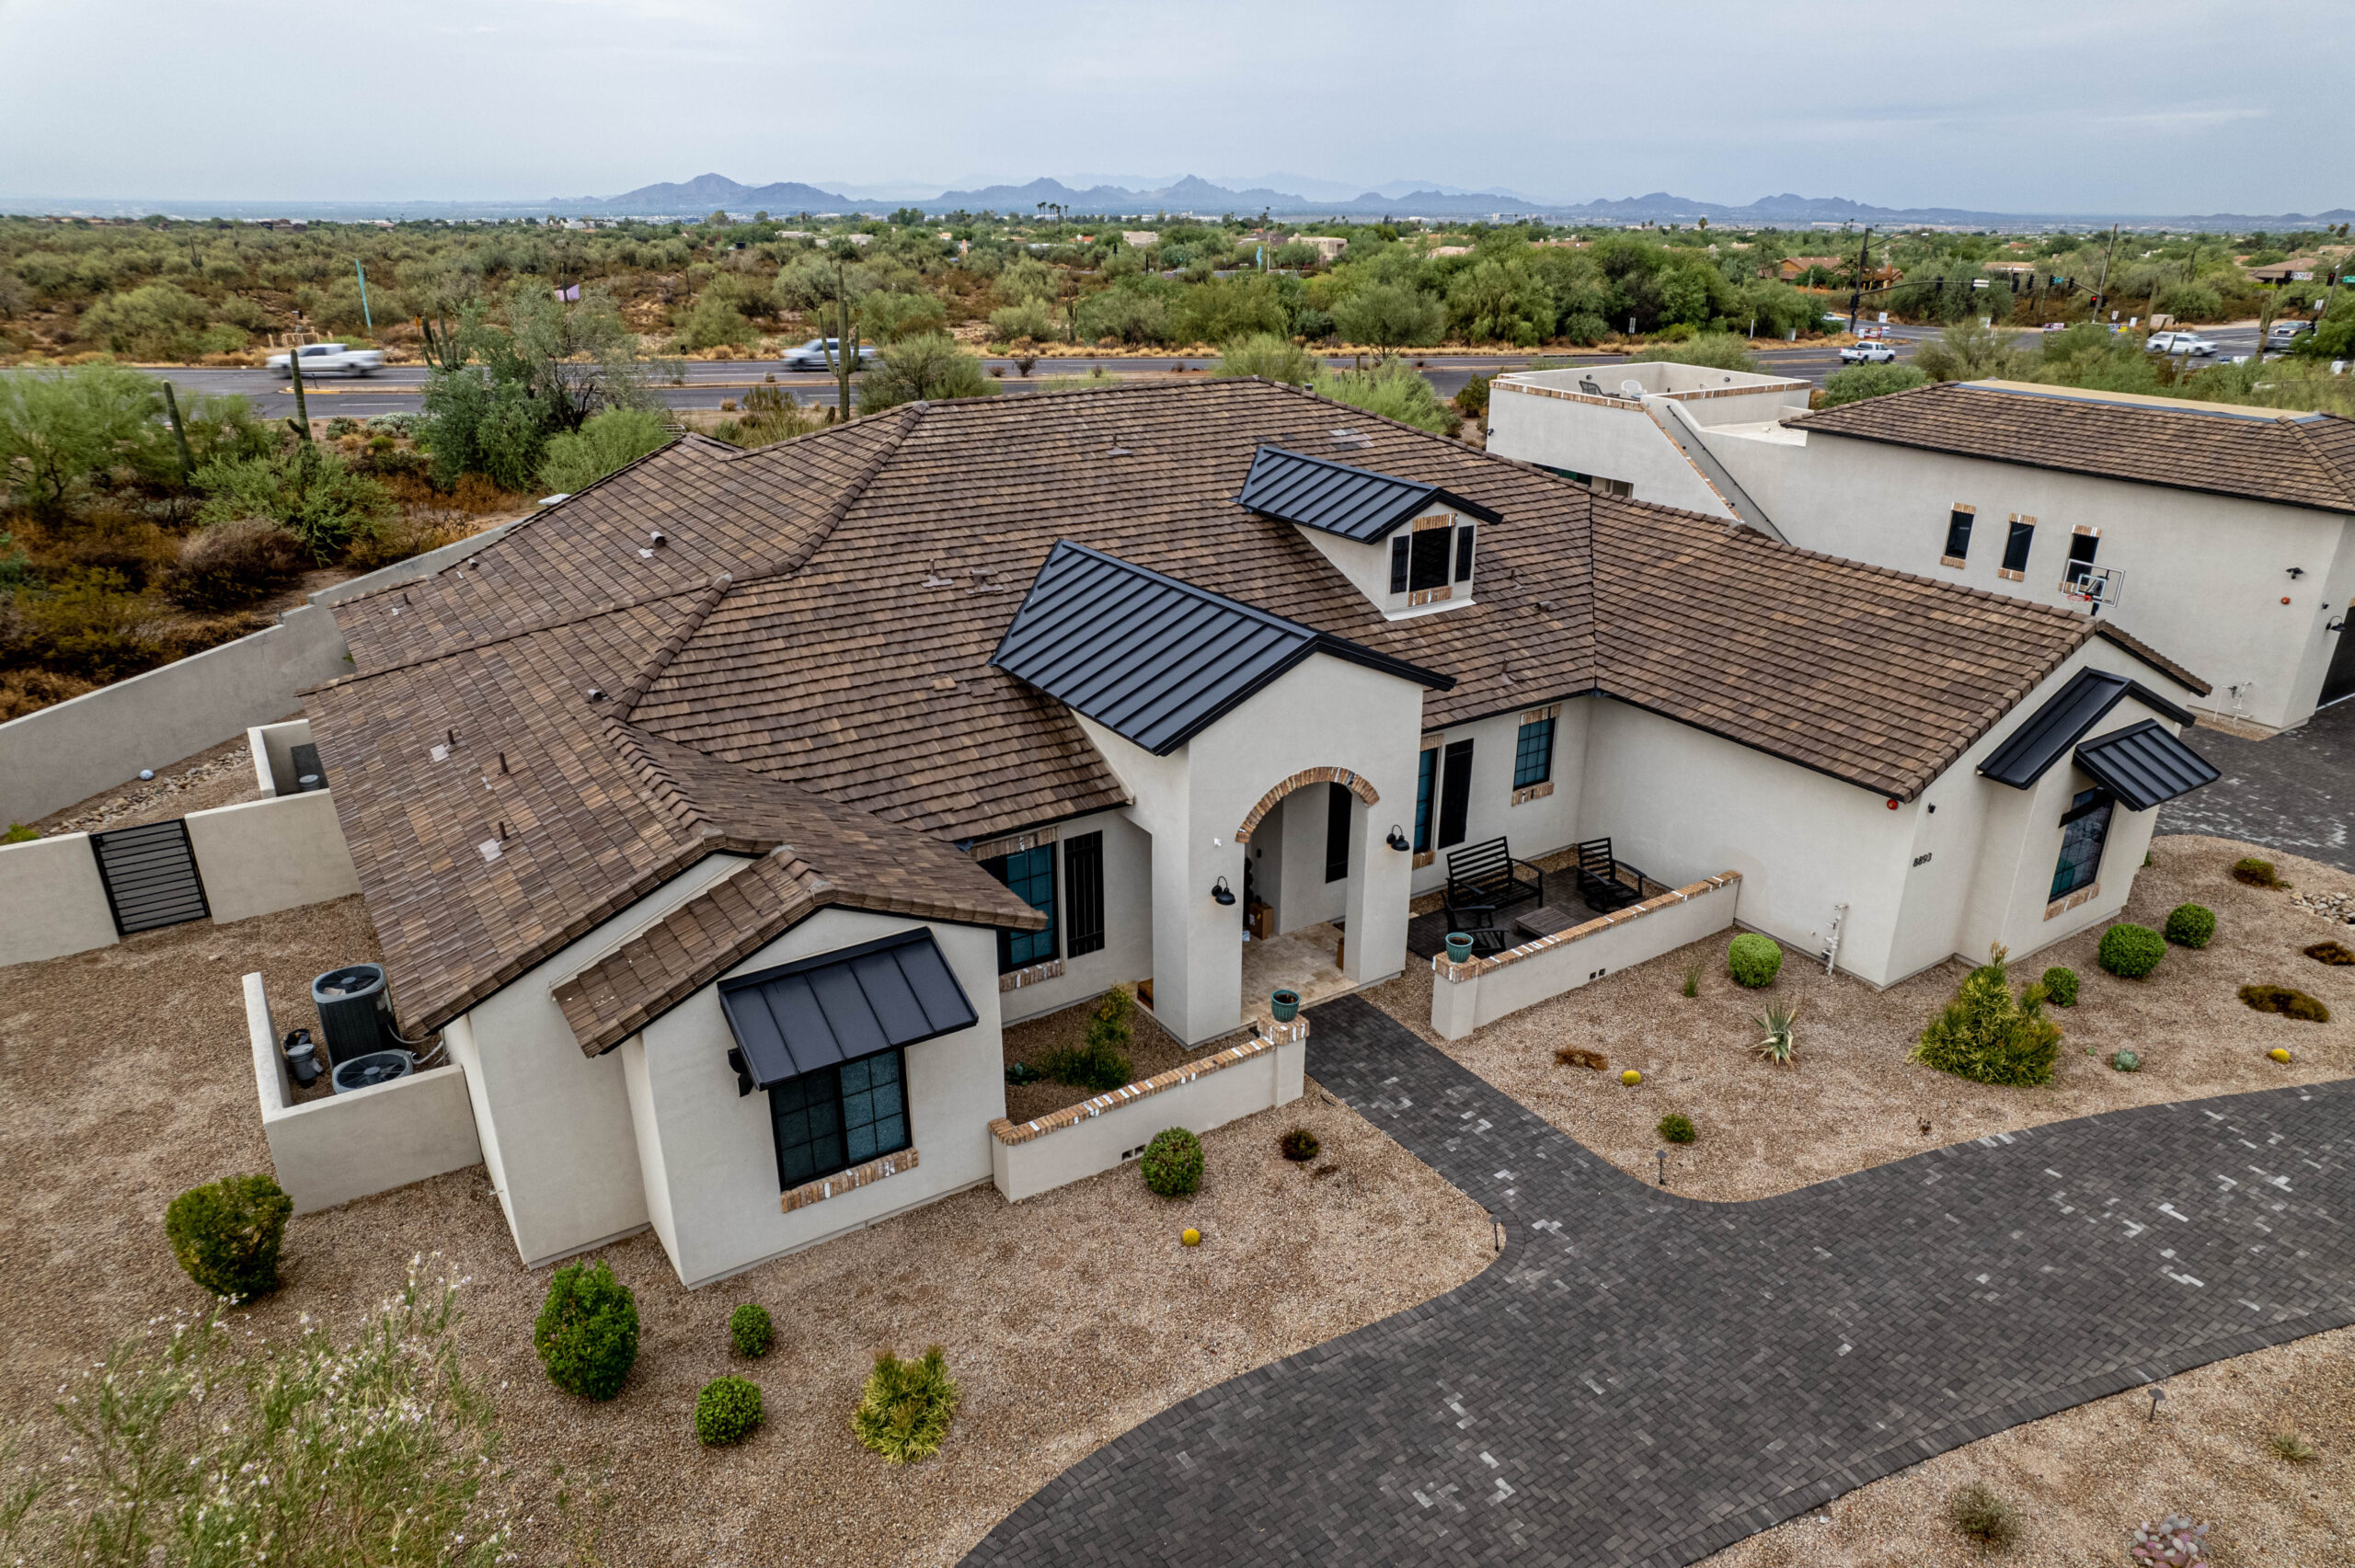 Overhead shot of a recently completed roofing project in McCormick Ranch, shimmering under the sun.